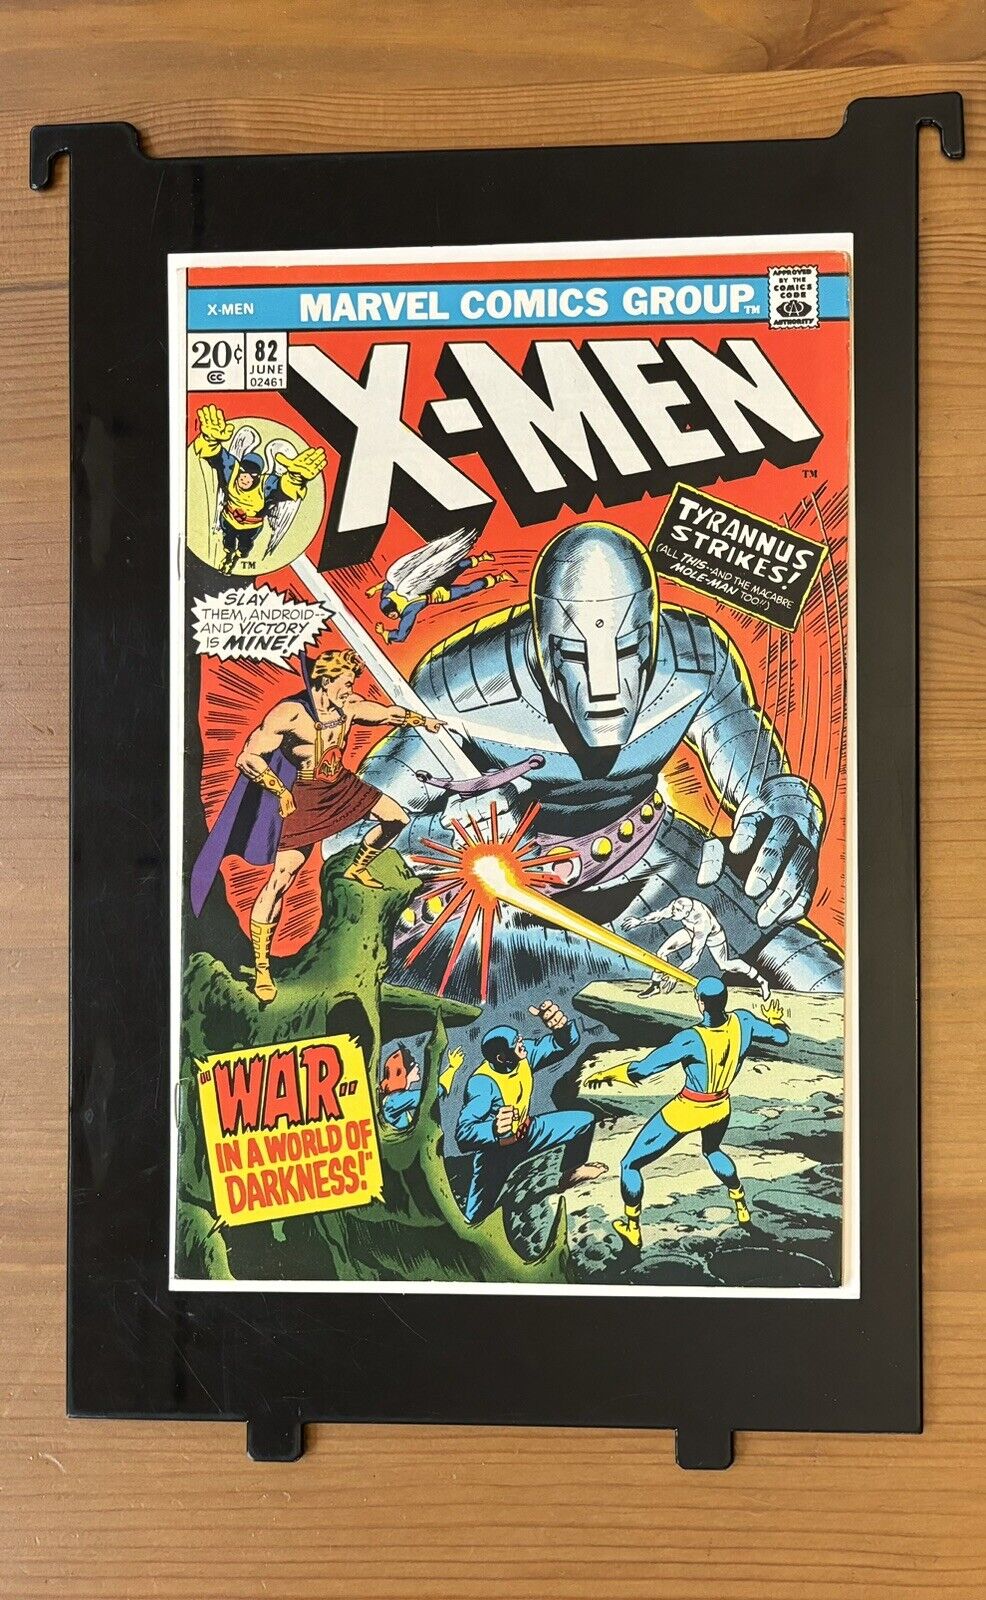 STUNNING HIGH GRADE X-MEN #82 June 1973 White Pages I SHIPS FAST